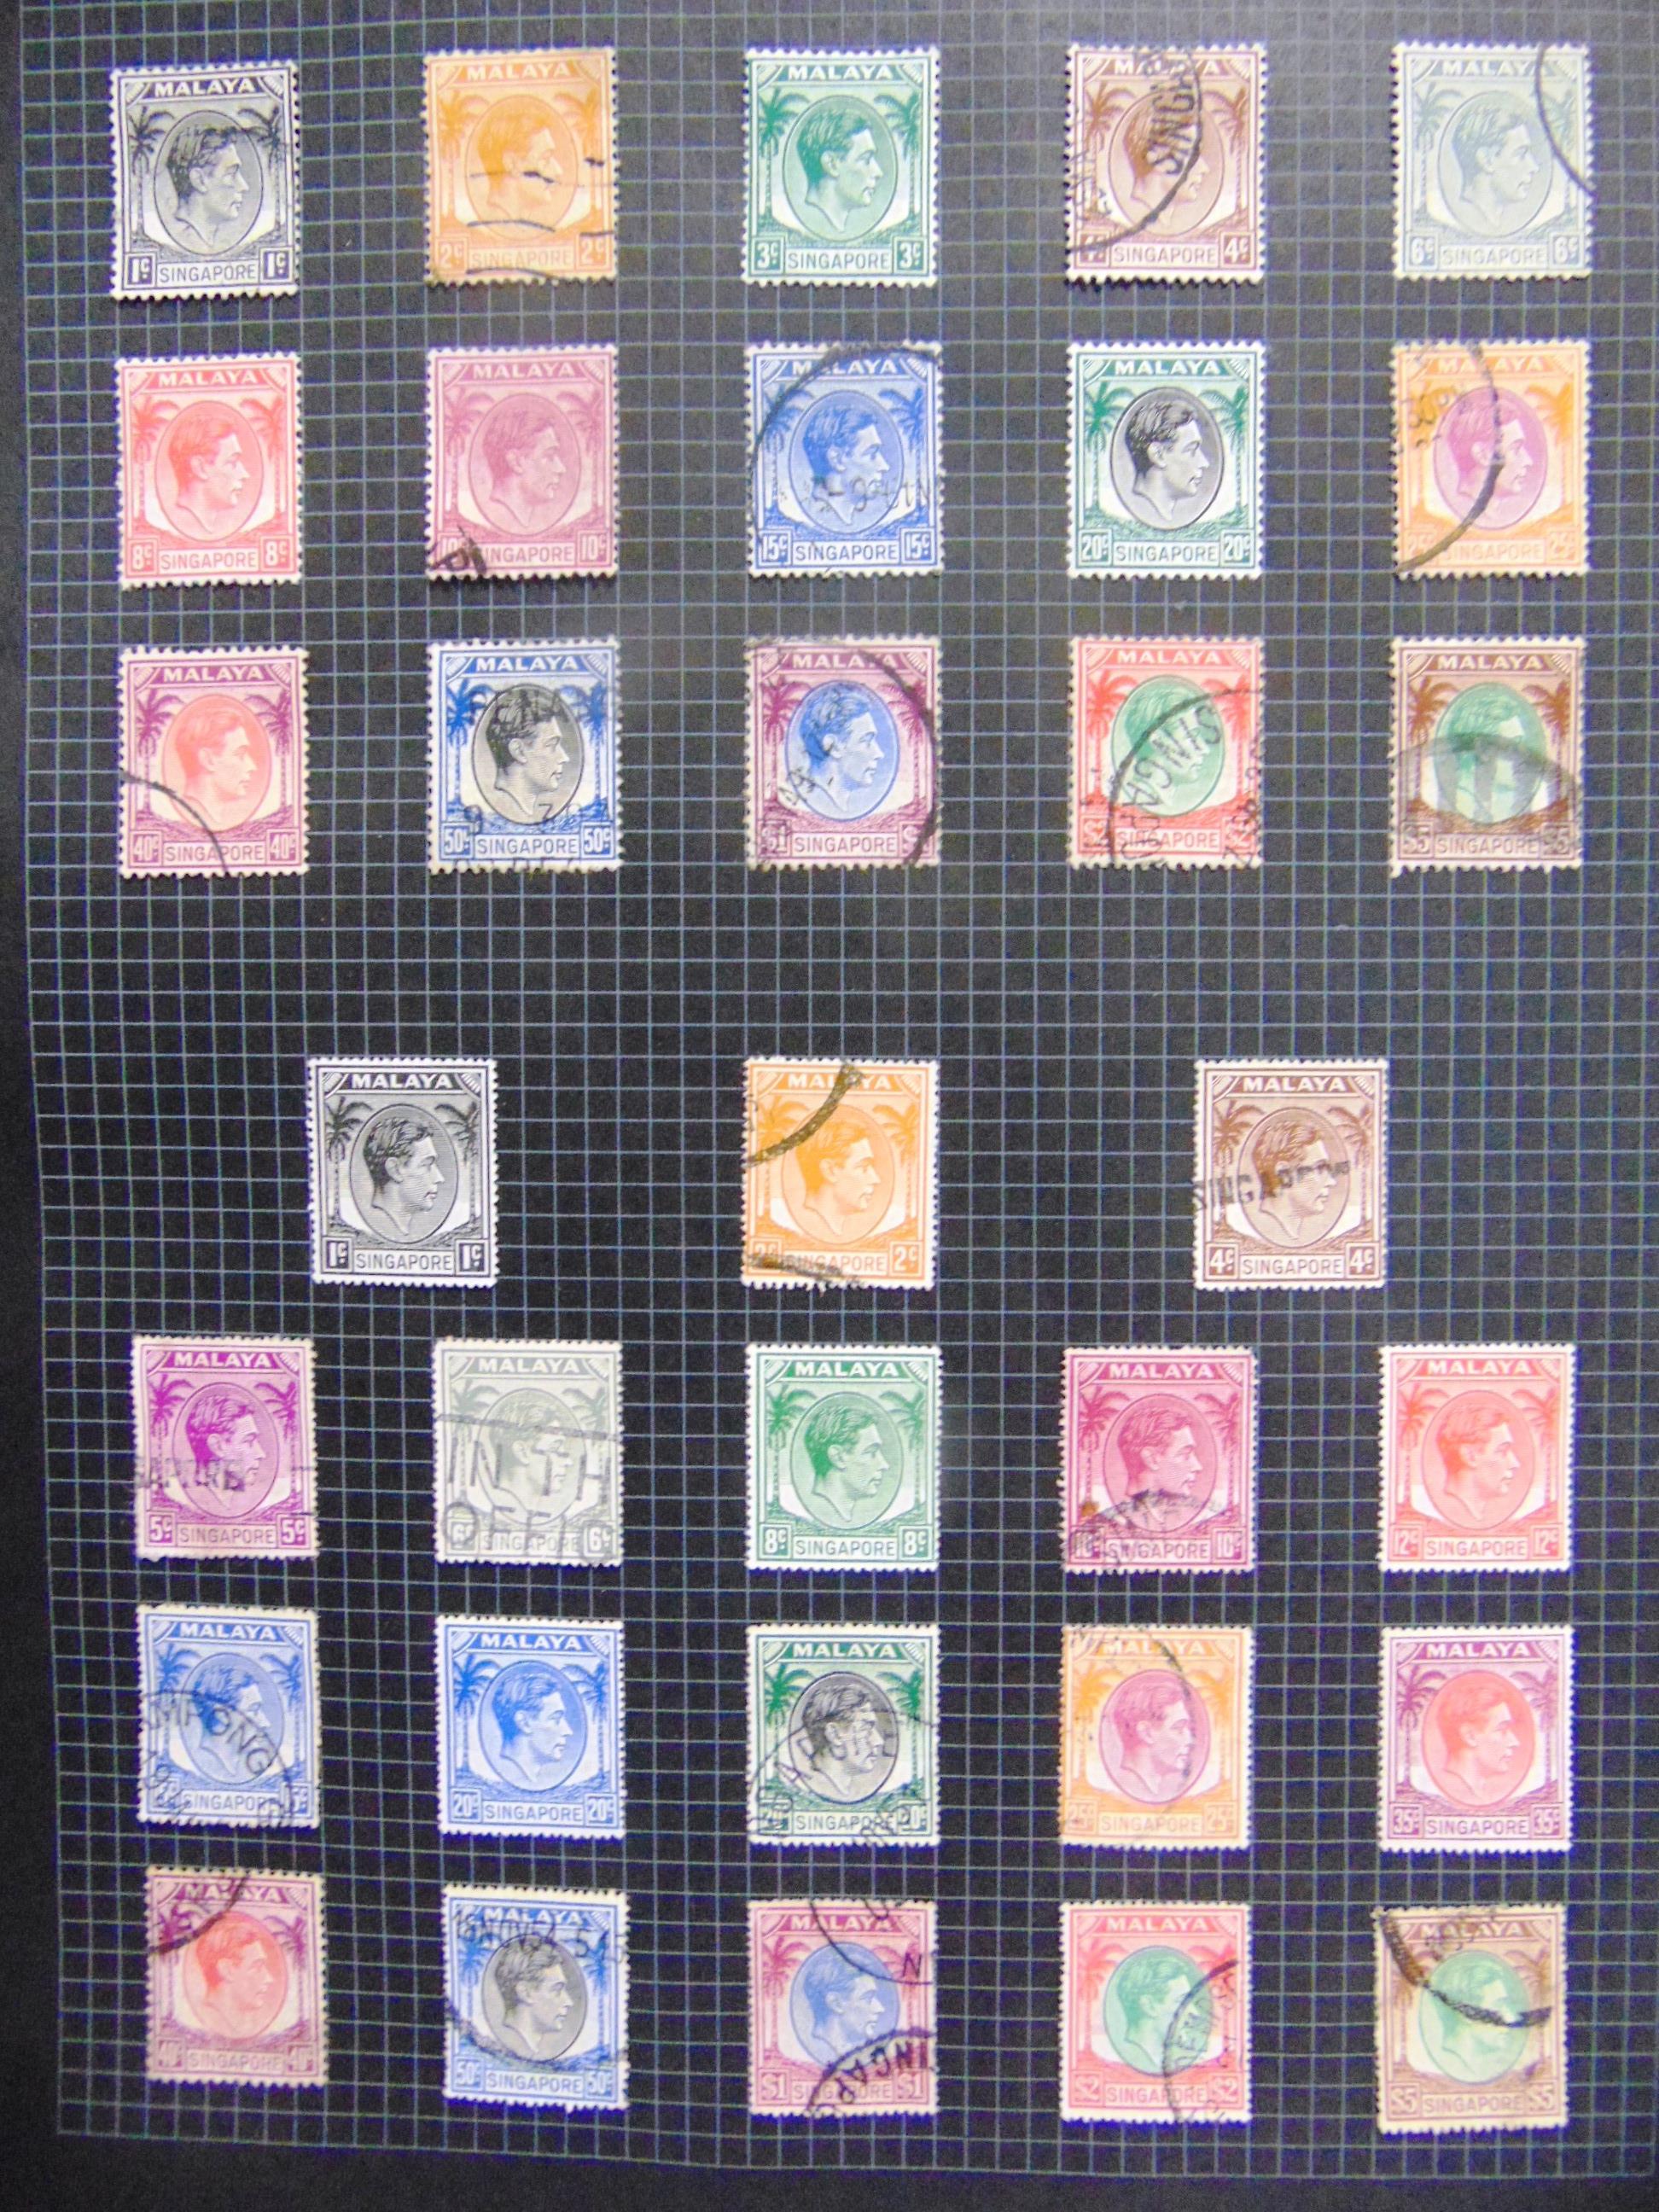 STAMPS - A BRITISH COMMONWEALTH COLLECTION Geo. VI - Eliz. II, mint and used, (three albums).